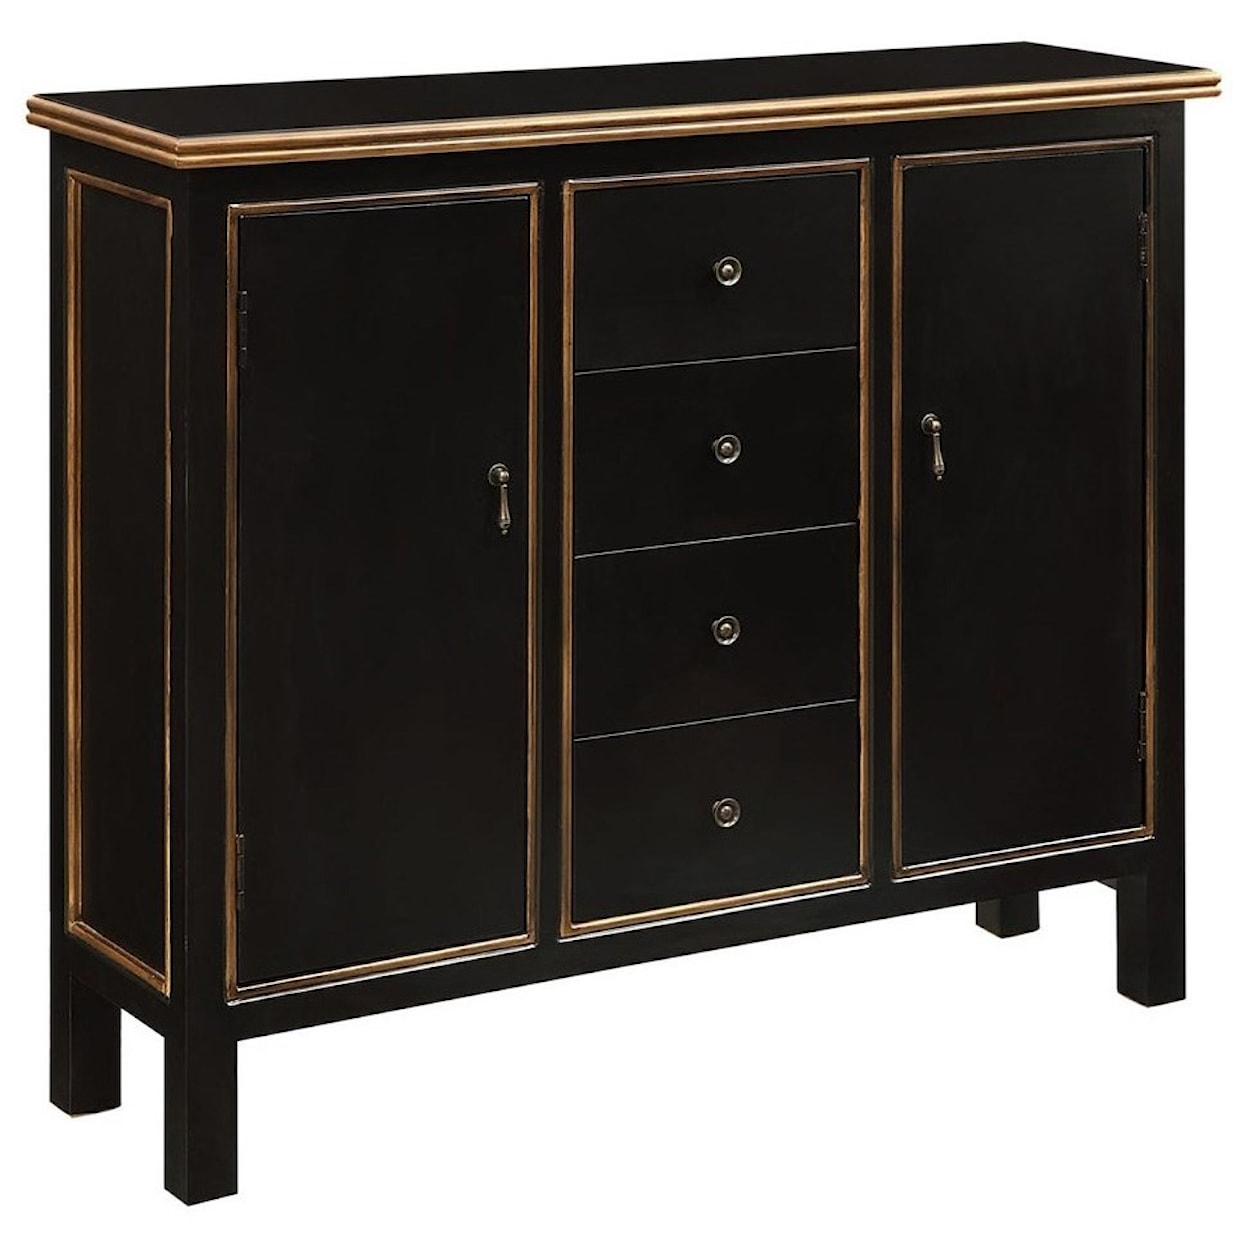 Crestview Collection Accent Furniture Belgrade Wall Cabinet